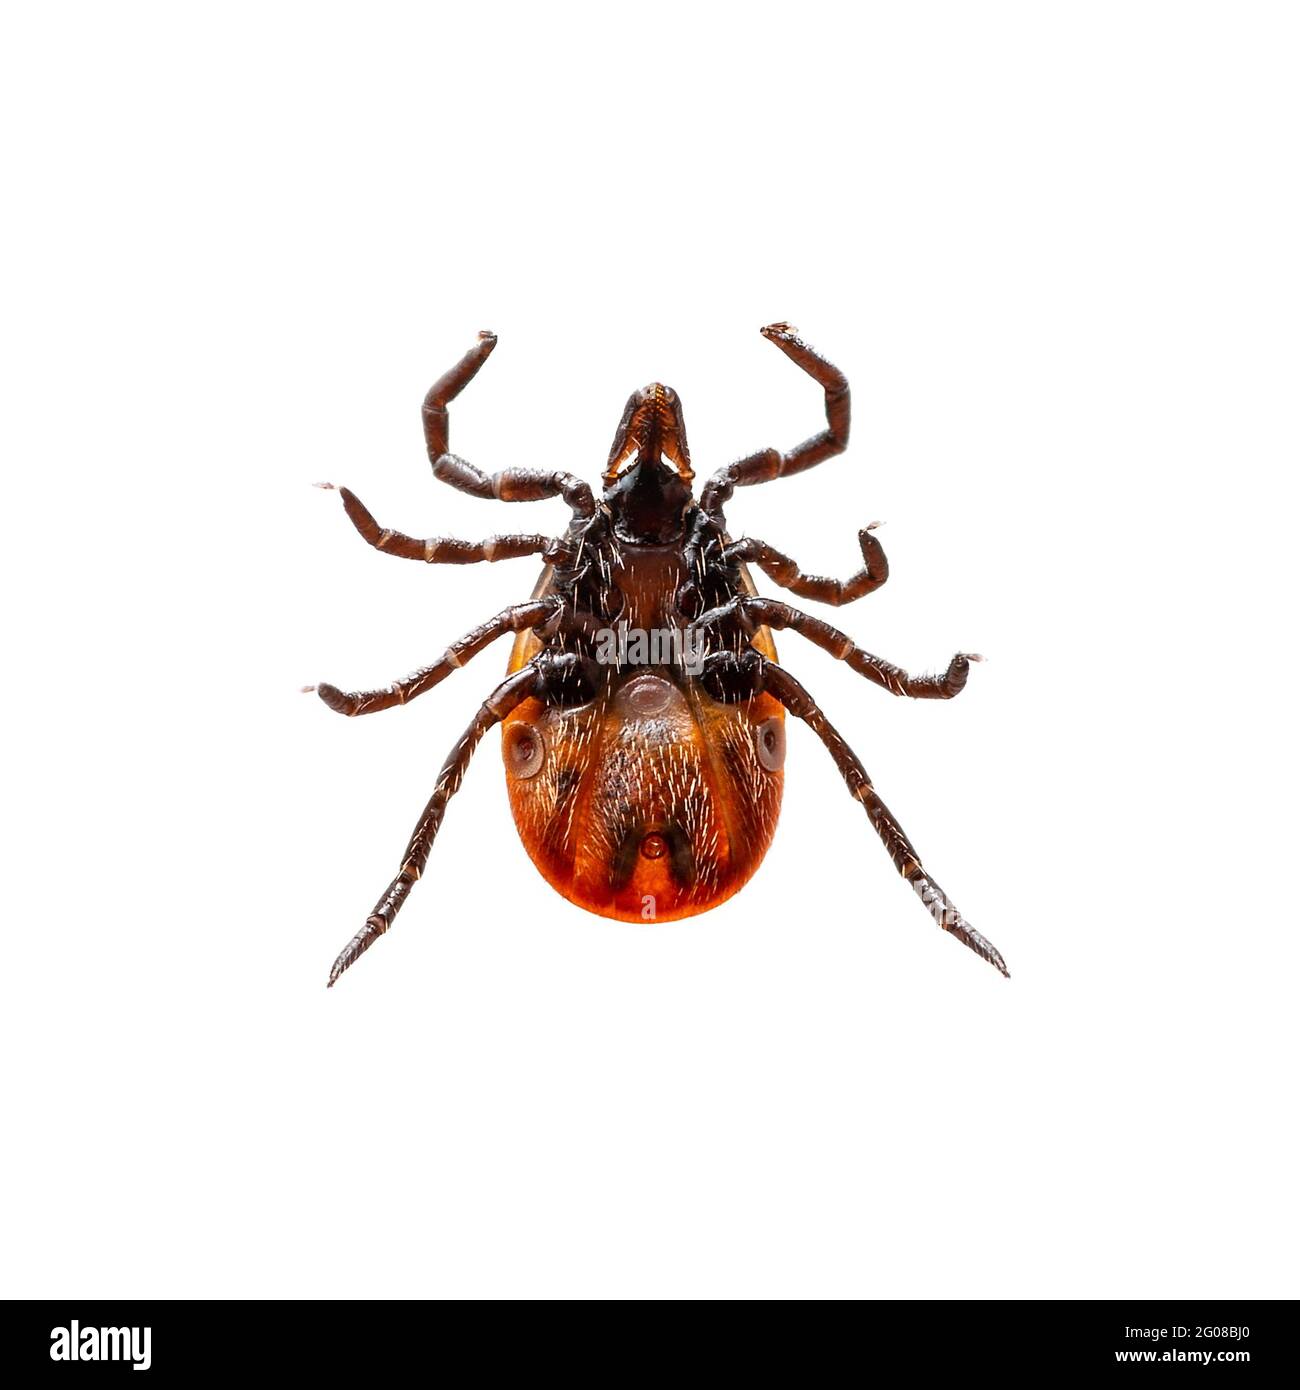 Infectious Encephalitis Ixodes Scapularis or Persulcatus Deer Tick Insect Isolated on White. Encephalitis Virus or Lyme Borreliosis Disease Infected I Stock Photo